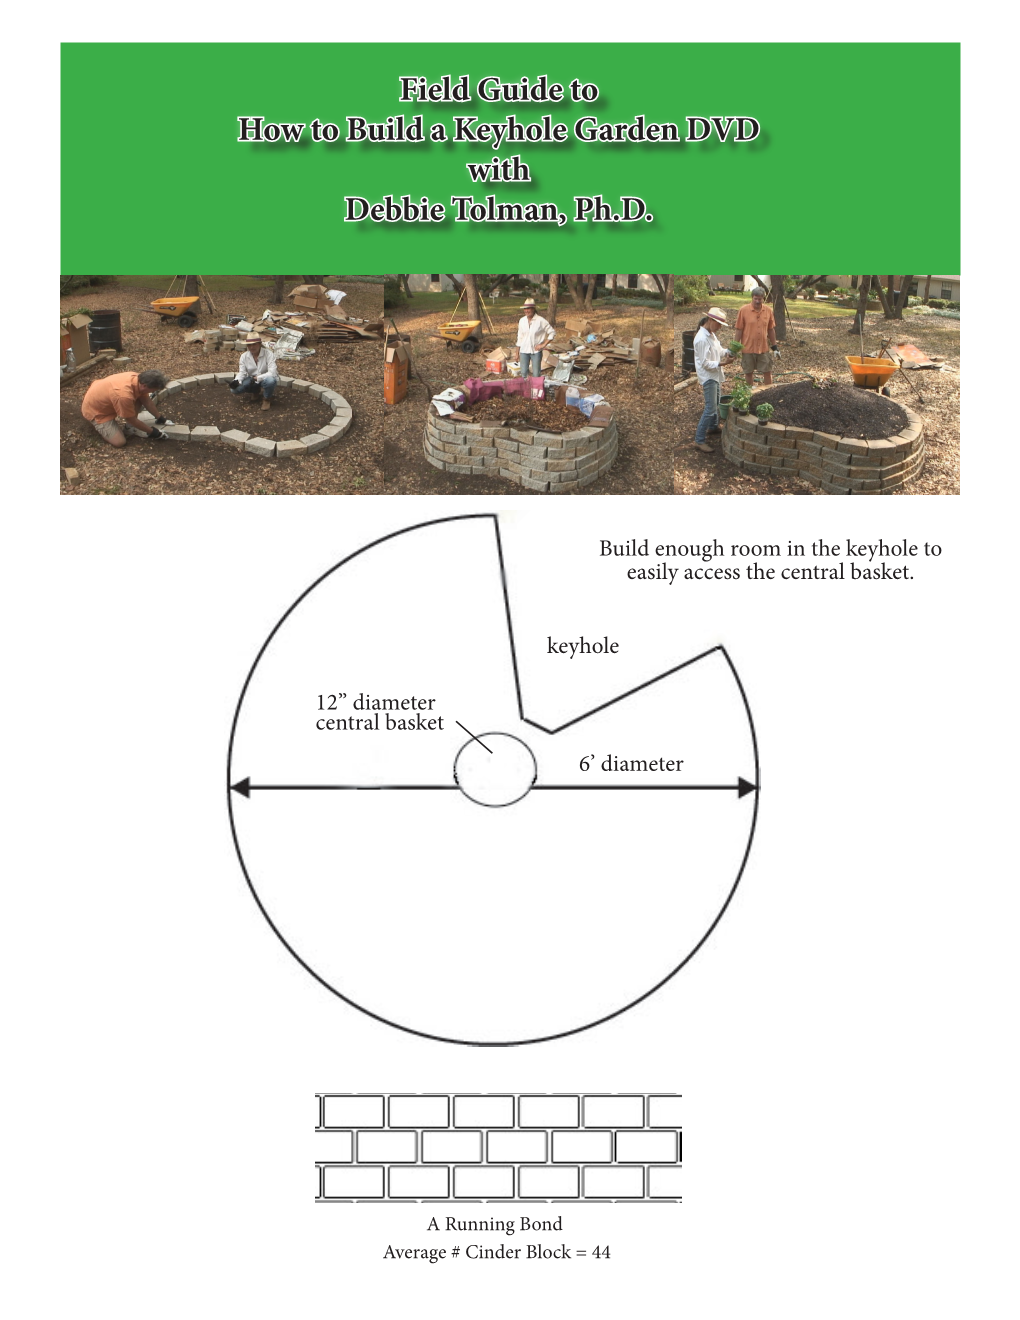 Field Guide to How to Build a Keyhole Garden DVD with Debbie Tolman, Ph.D